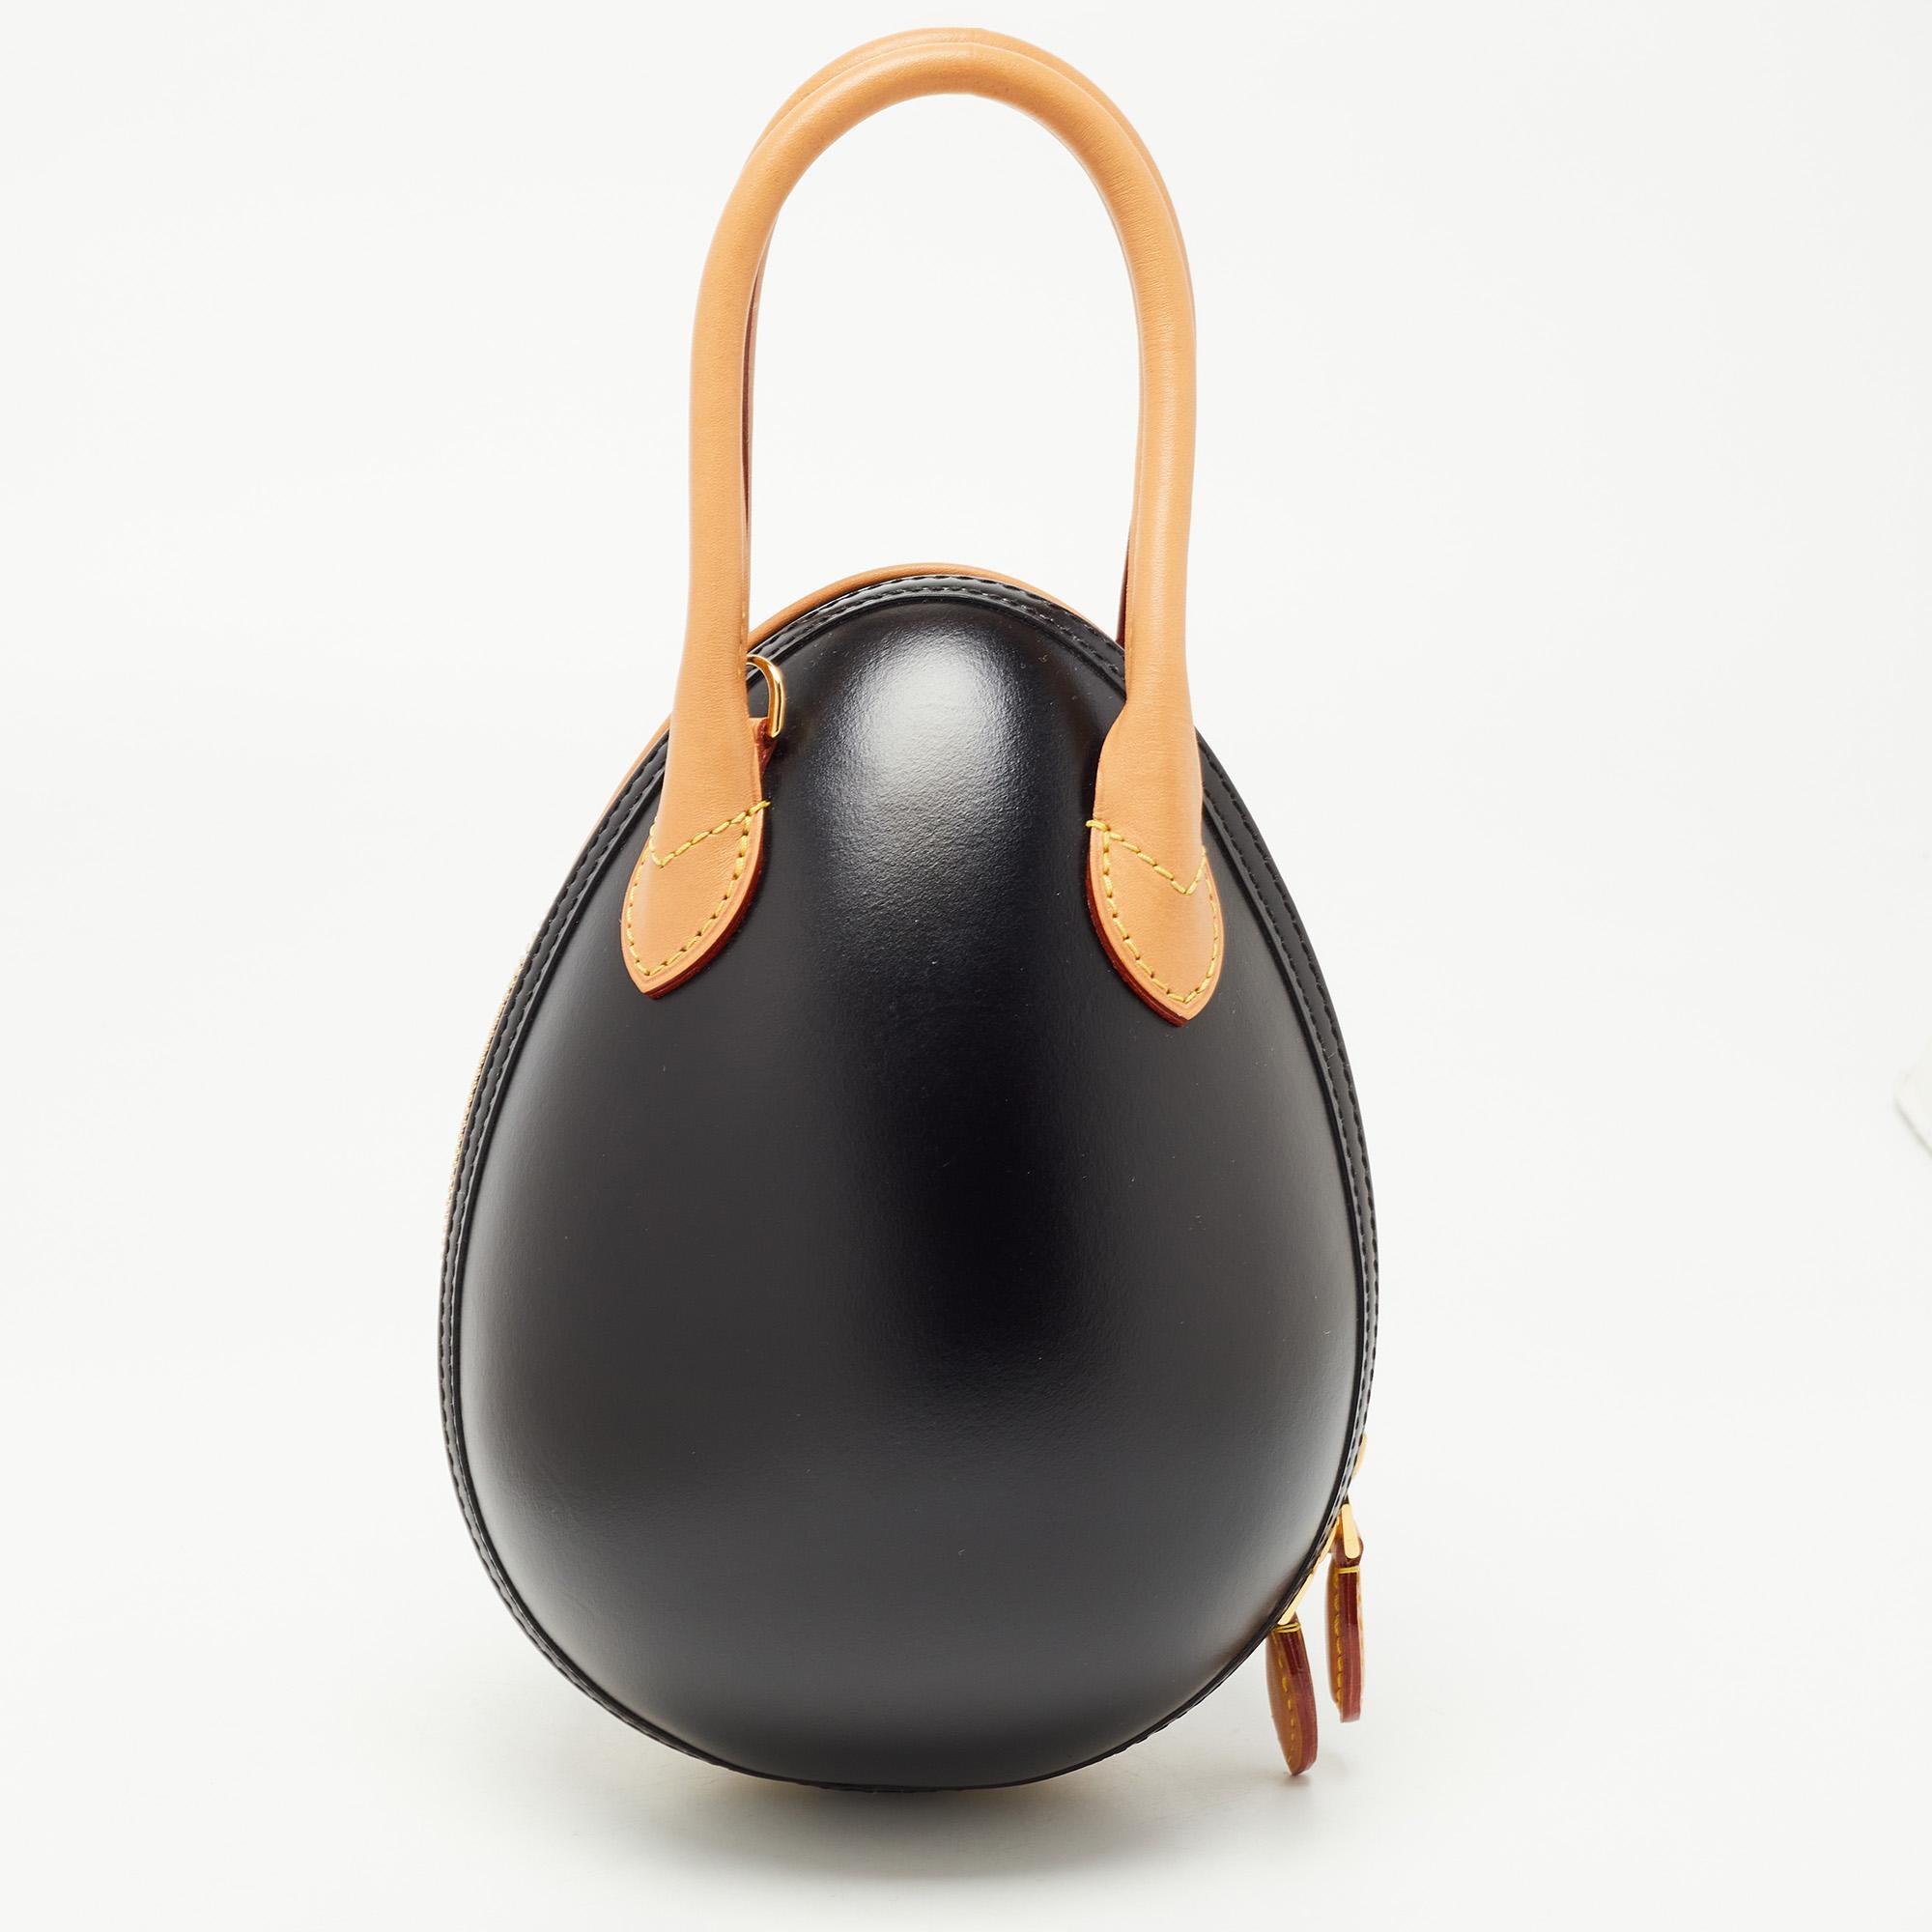 This Louis Vuitton handbag is an example of the brand's fine designs blended finely with the latest trends in fashion. This LV Egg bag has a signature touch with the iconic monogram canvas and tan leather construction, while the playful egg shape